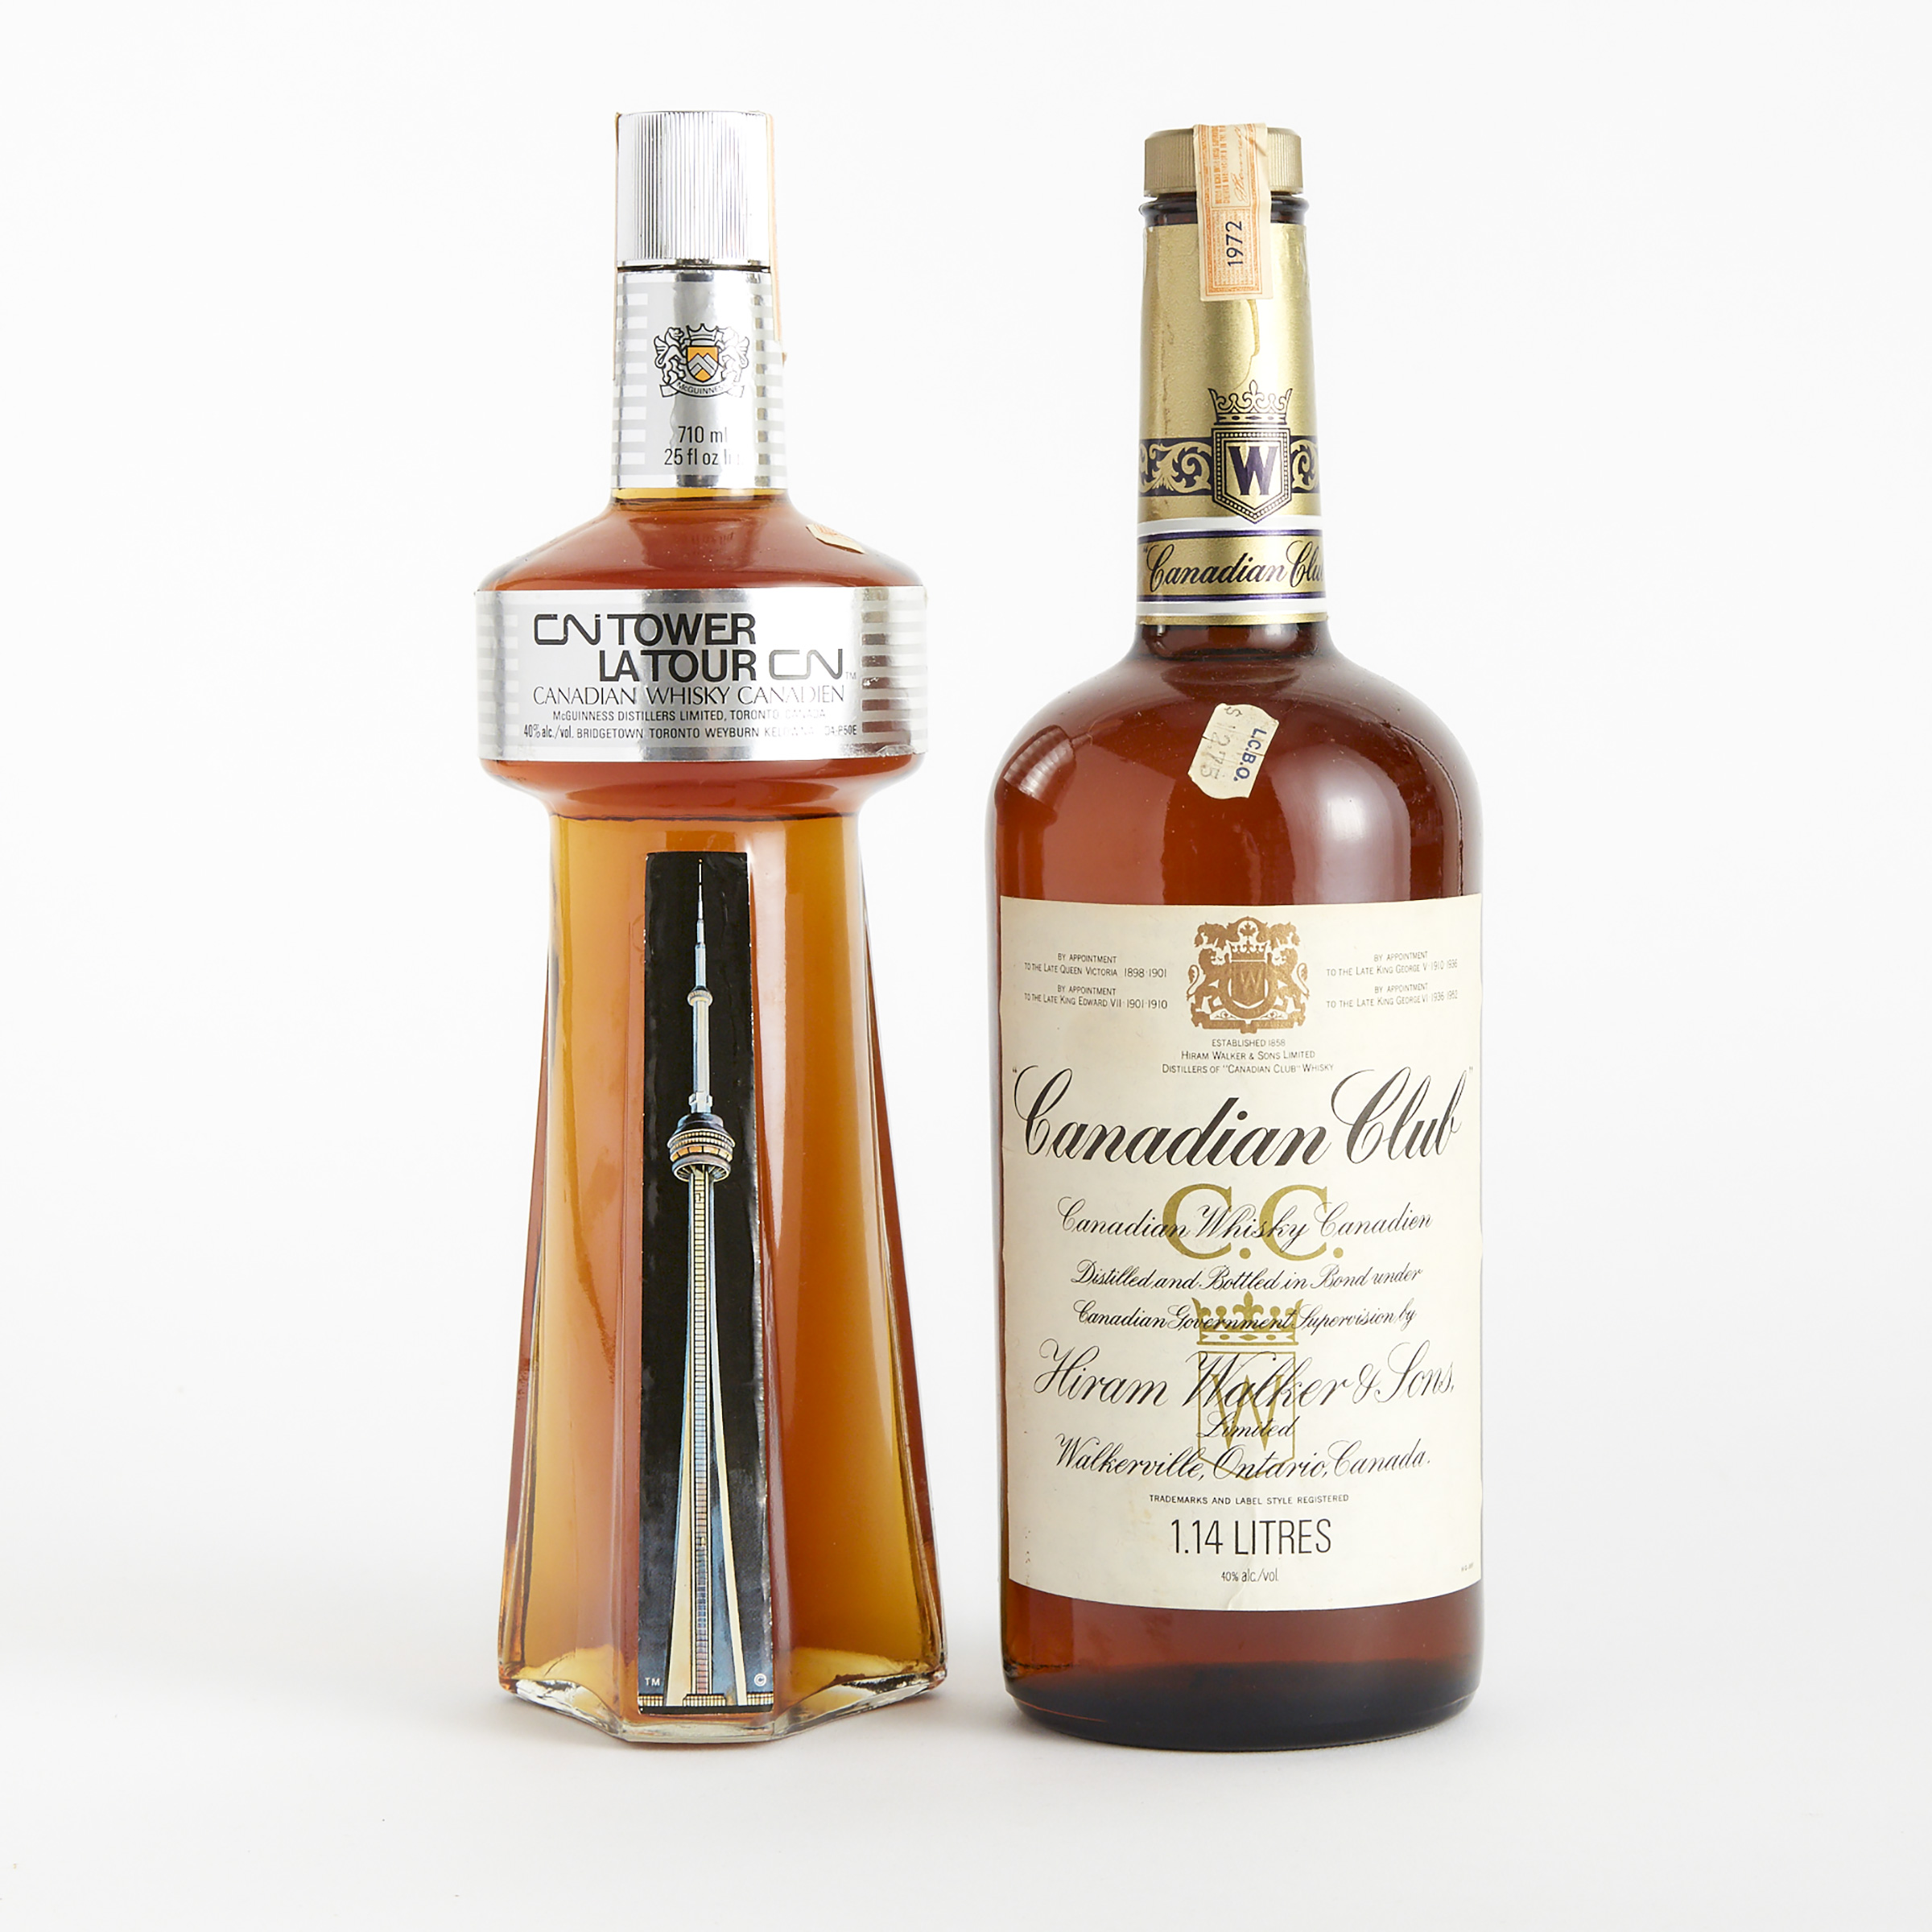 CANADIAN CLUB CANADIAN WHISKY NAS (ONE 1.14 L)
CN TOWER CANADIAN WHISKY NAS (ONE 25 OUNCES)